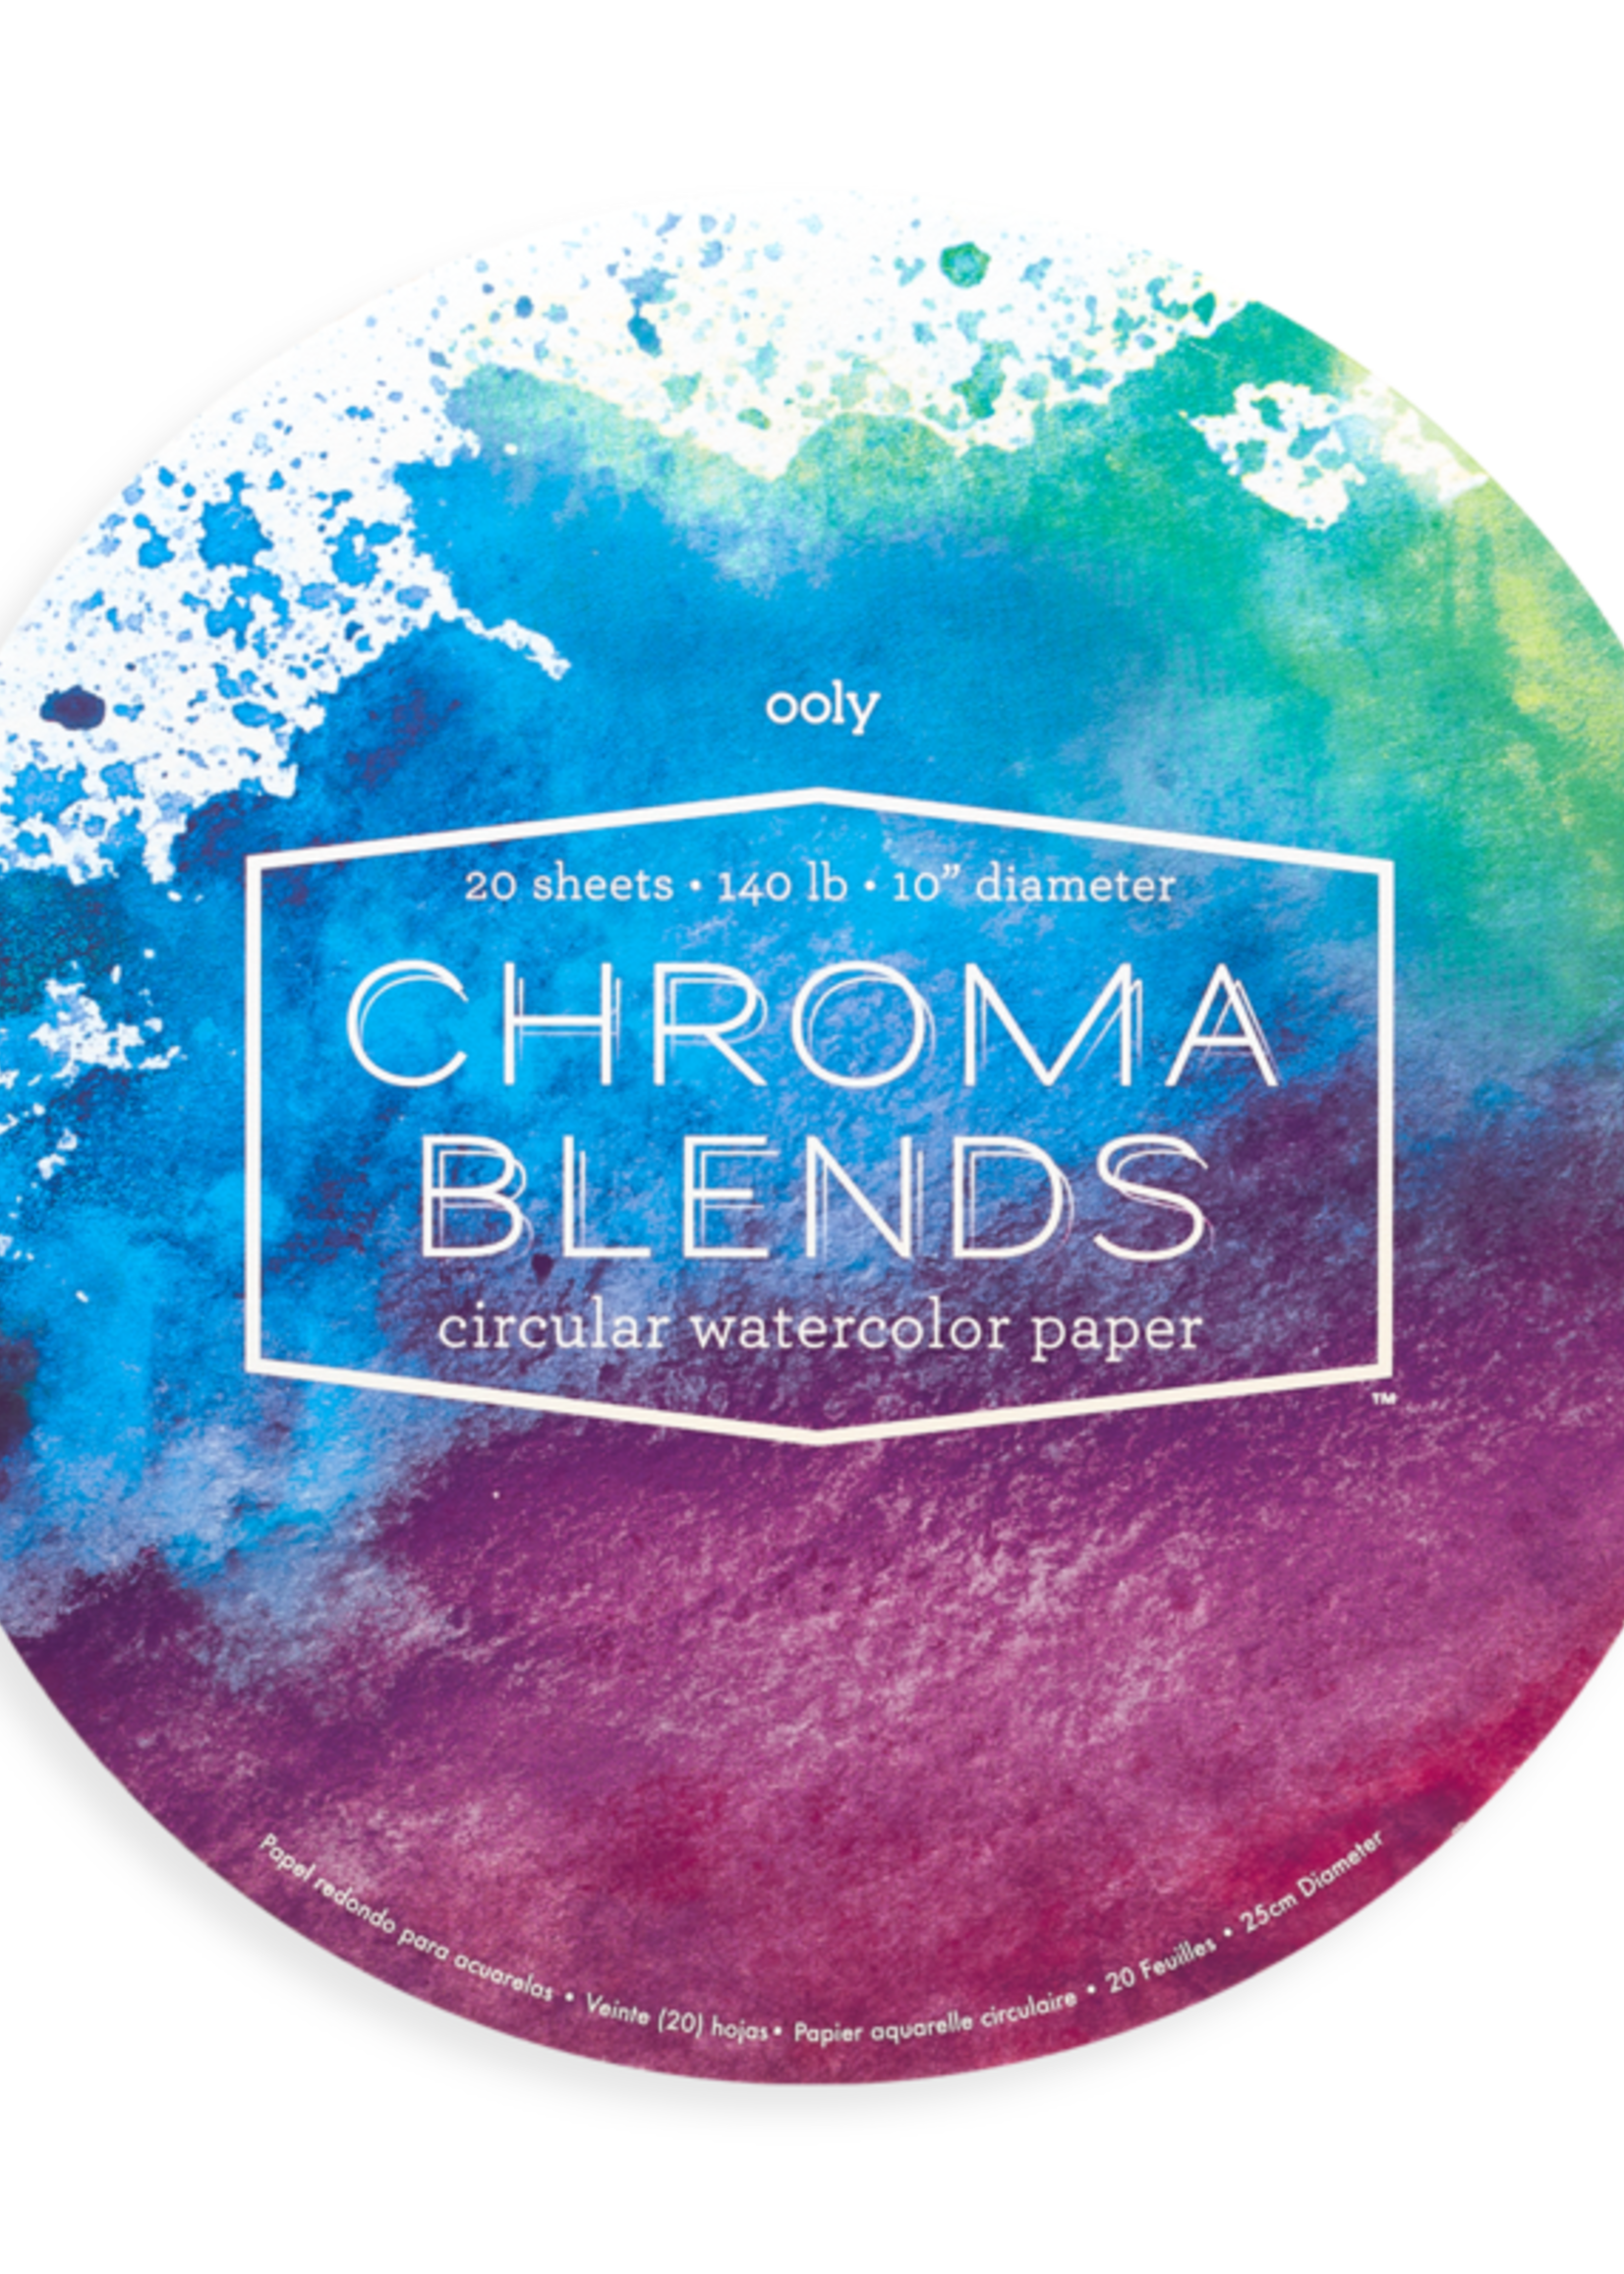 ooly Chroma Blends Watercolor Paper